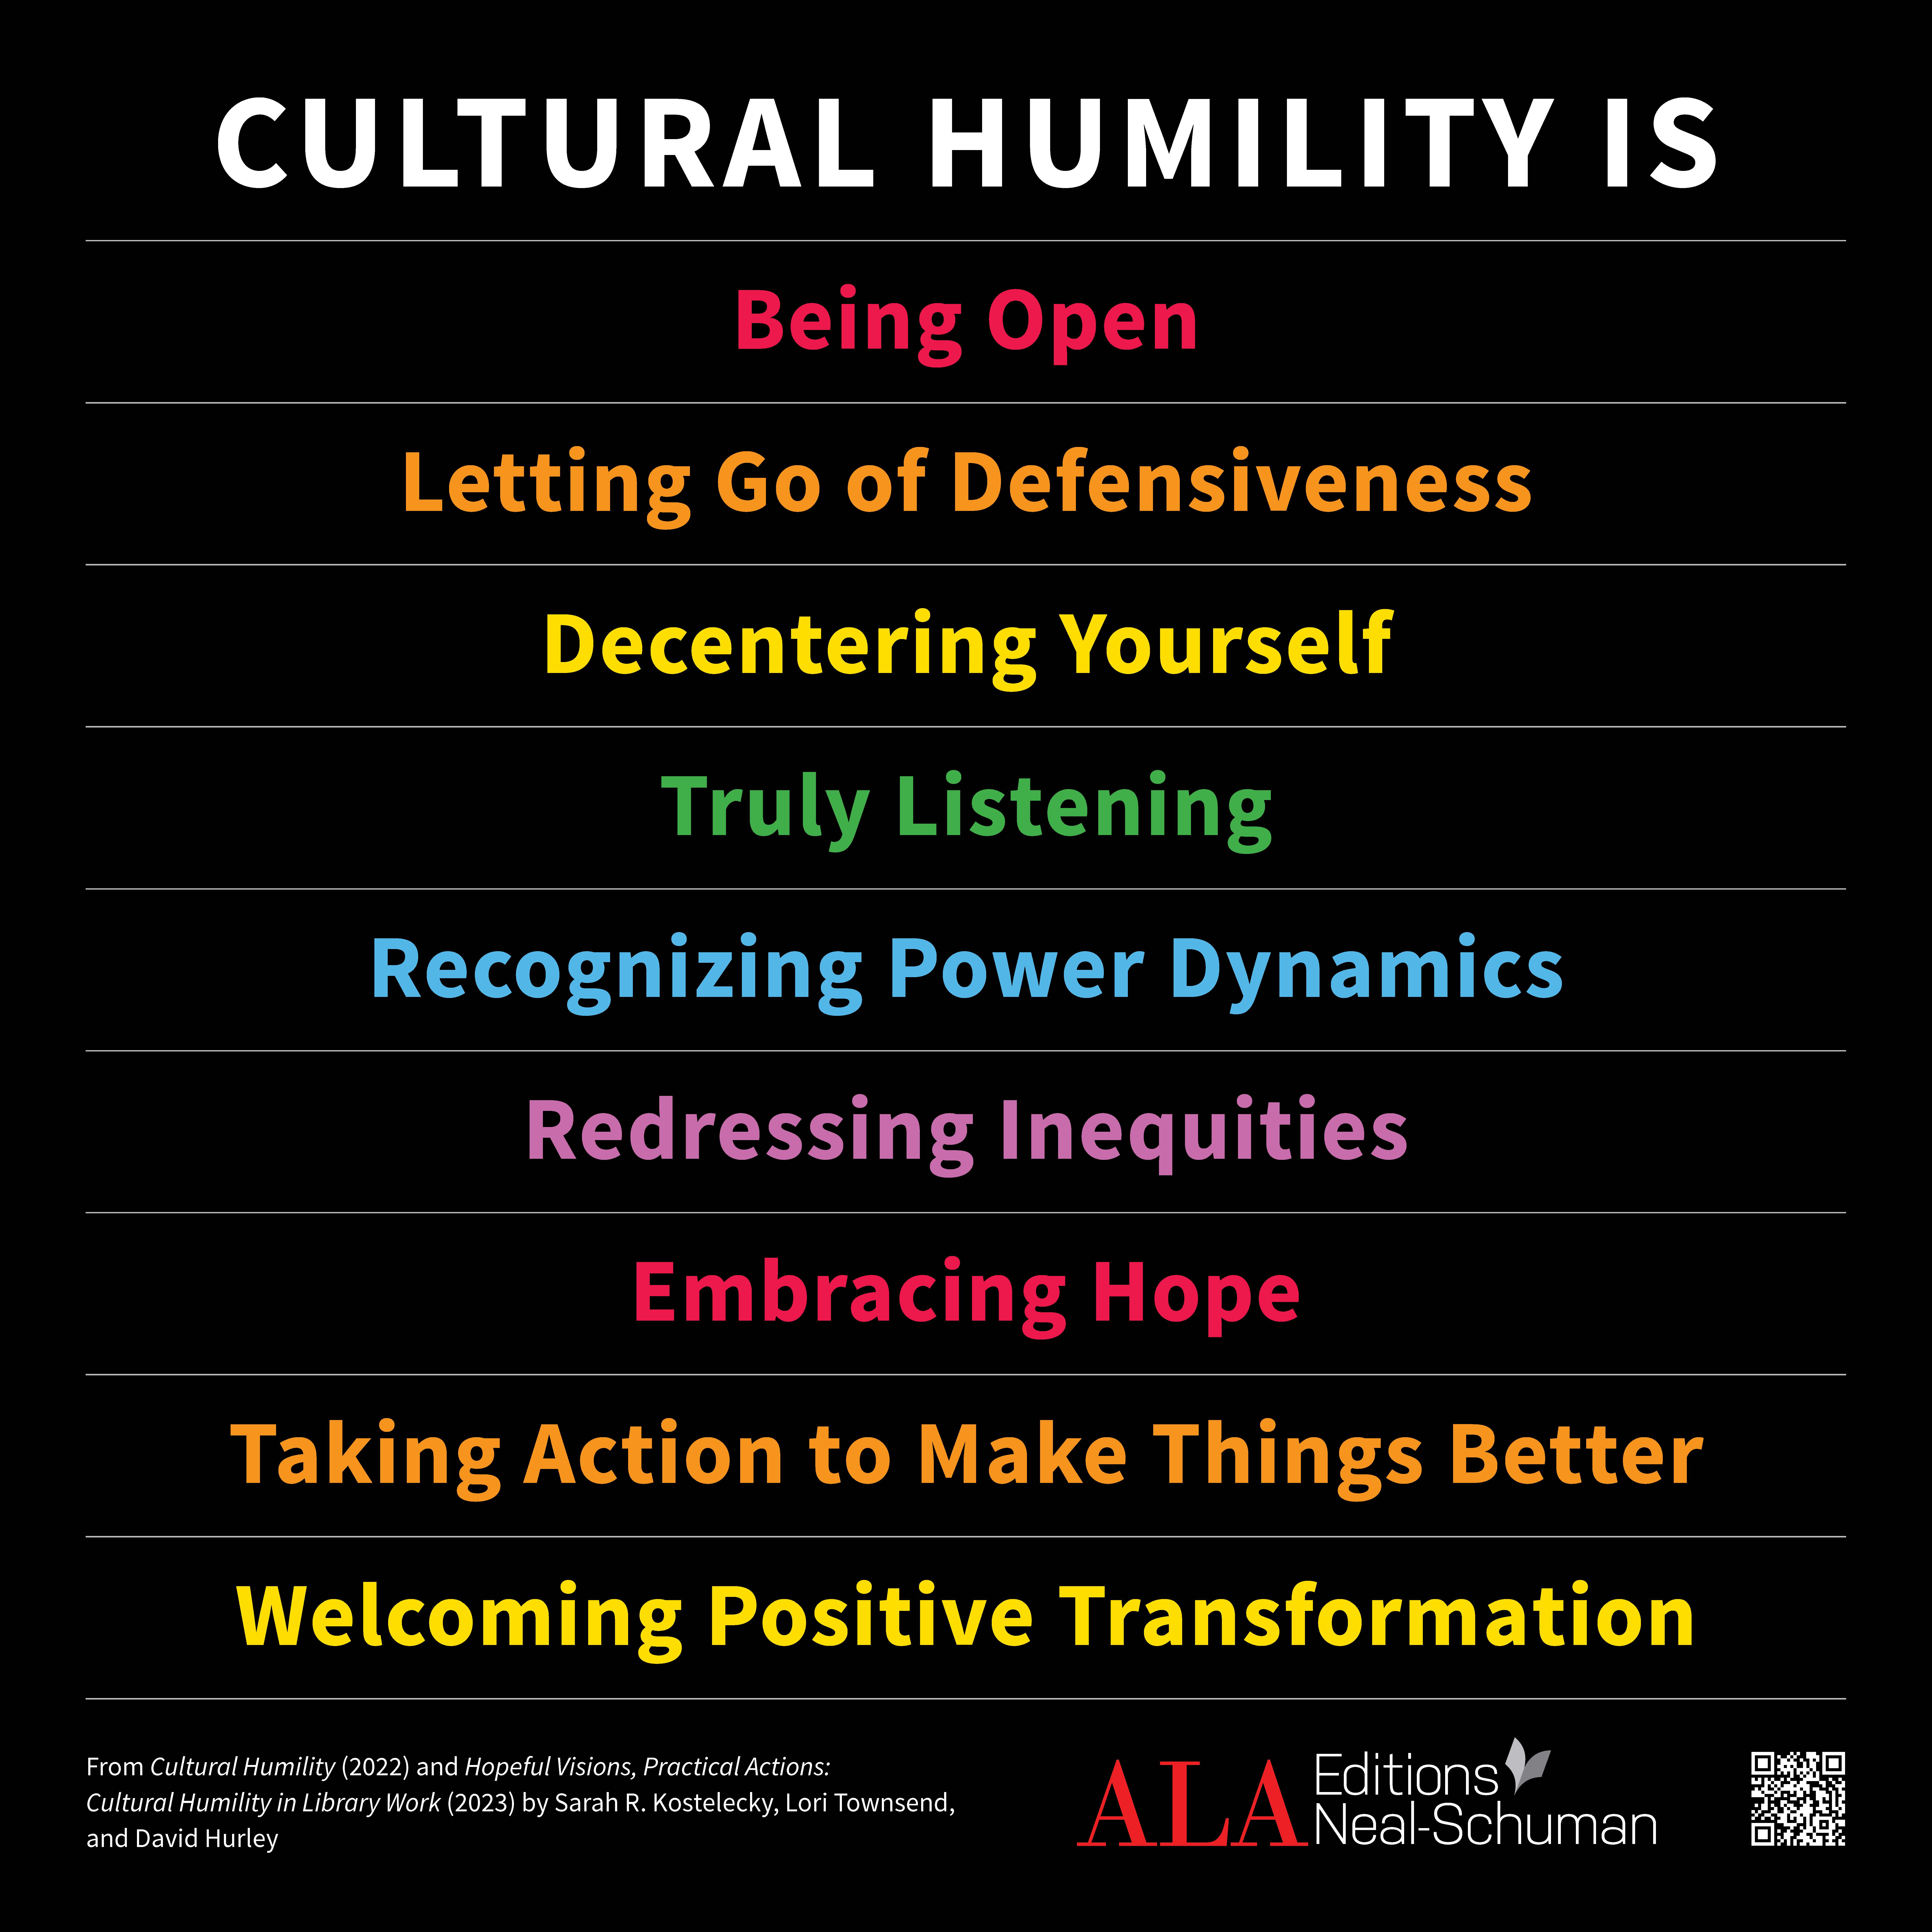 Cultural Humility poster describing the many facets of the practice